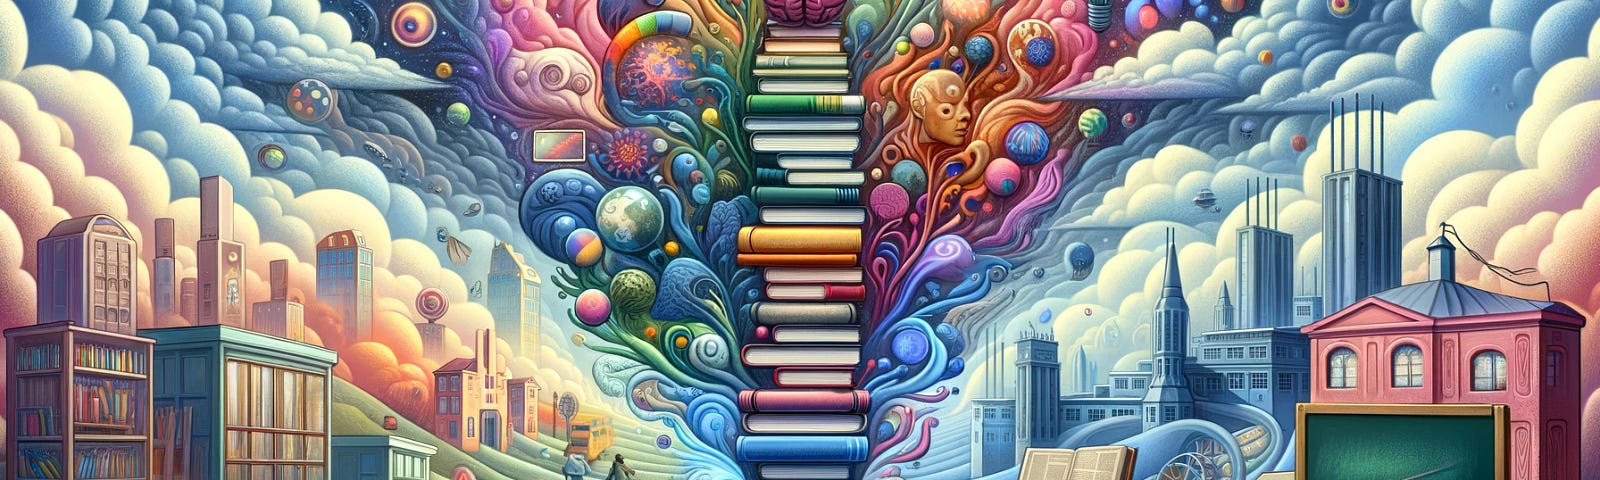 A person sitting amid a large pile of colorful books, with a whimsical landscape consisting of a school setting with a chalkboard, through a futuristic university, to a sci-fi environment with futuristic buildings